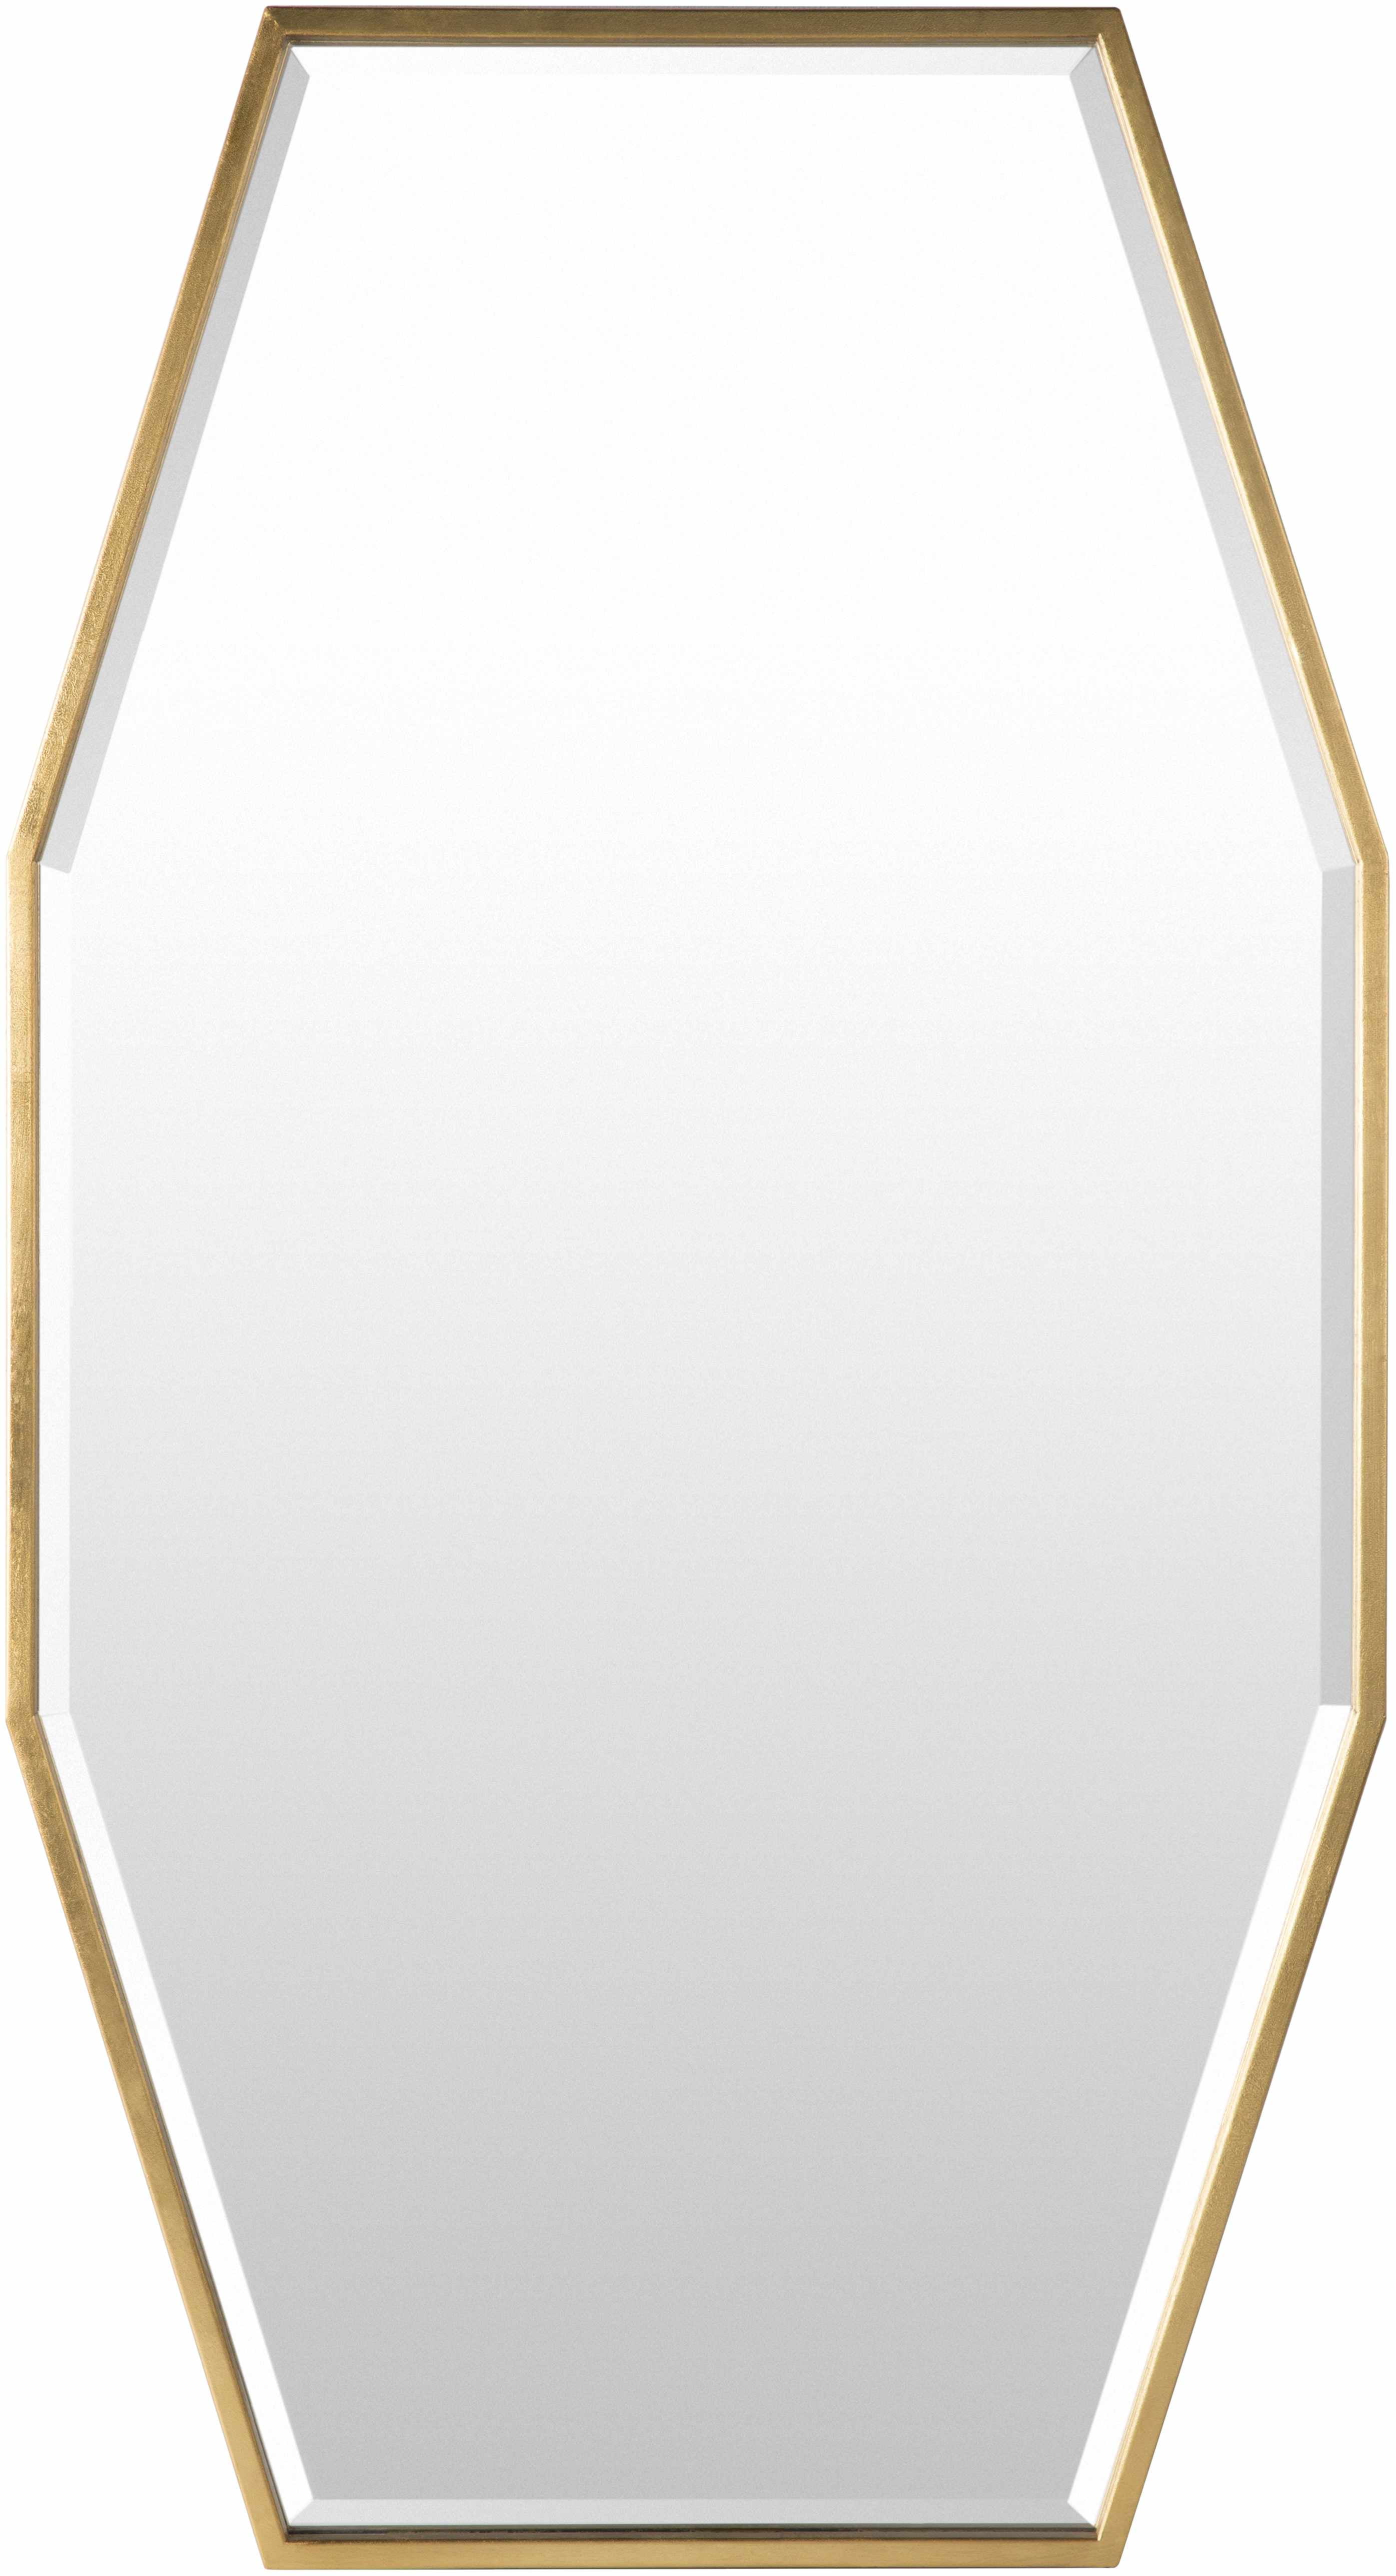 H & A Activity Wall Mirror, Gym Mirror for Home with Flat Polished Edge,  47x 31.5 (Single) (-1P)